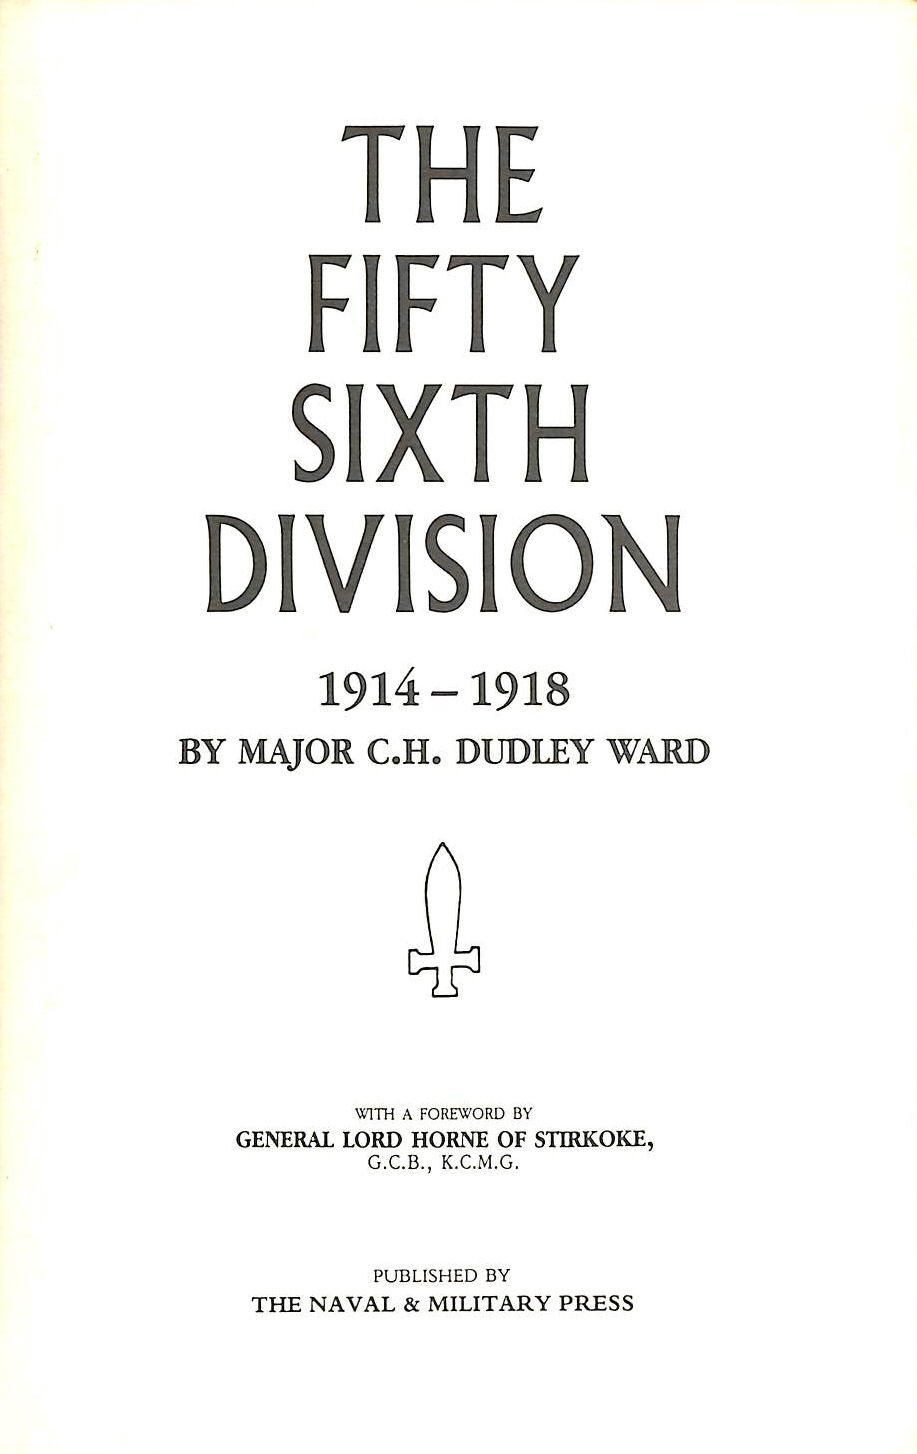 MAJOR C H DUDLEY WARD - The Fifty Sixth Division 1914-1918